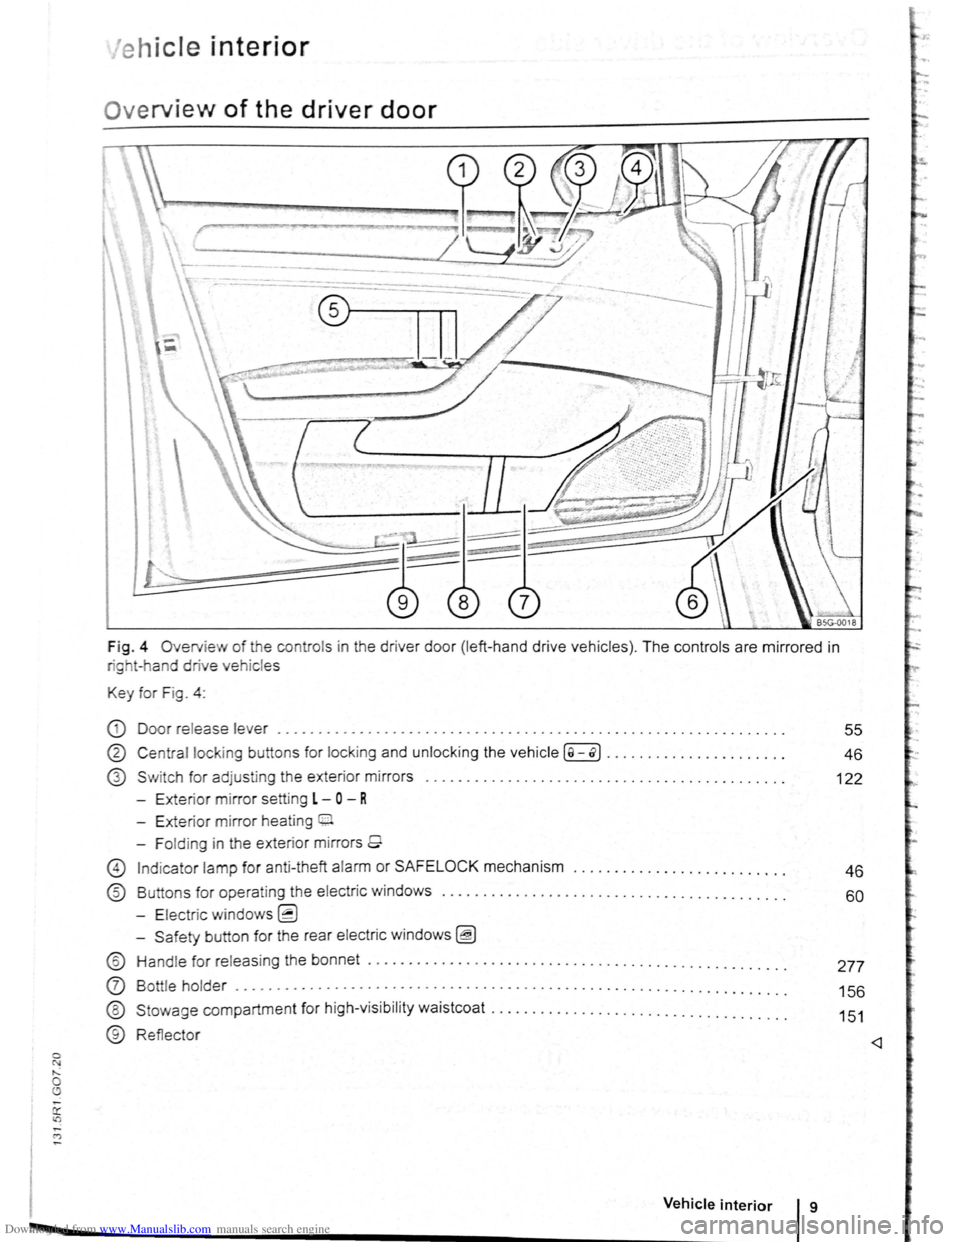 VOLKSWAGEN SCIROCCO 2012  Owners Manual Downloaded from www.Manualslib.com manuals search engine 0 N ,..; 0 
e h ic le interior 
Ov erview of the driver door 
Fig . 4 Overv ie w of the  contro ls  in  the drive r doo r (left -ha nd  dr ive